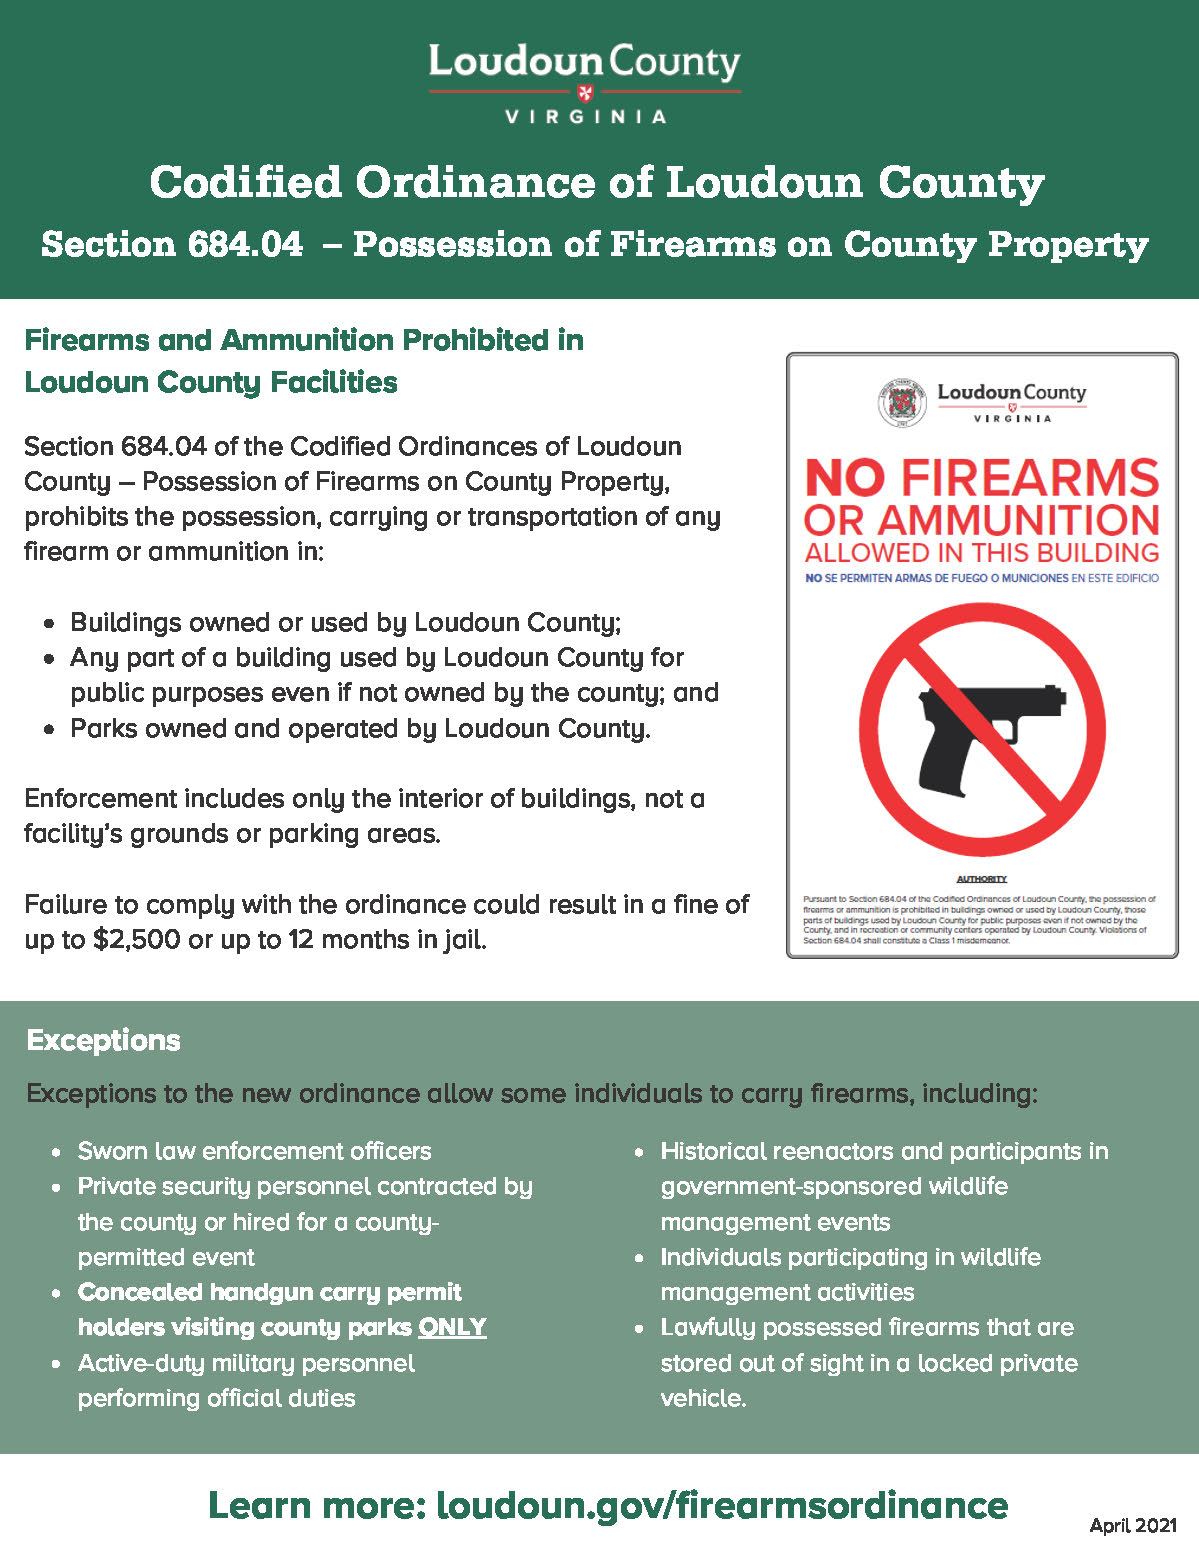 Public Reference Guide_Firearms Signage-Enforcement in County Buildings